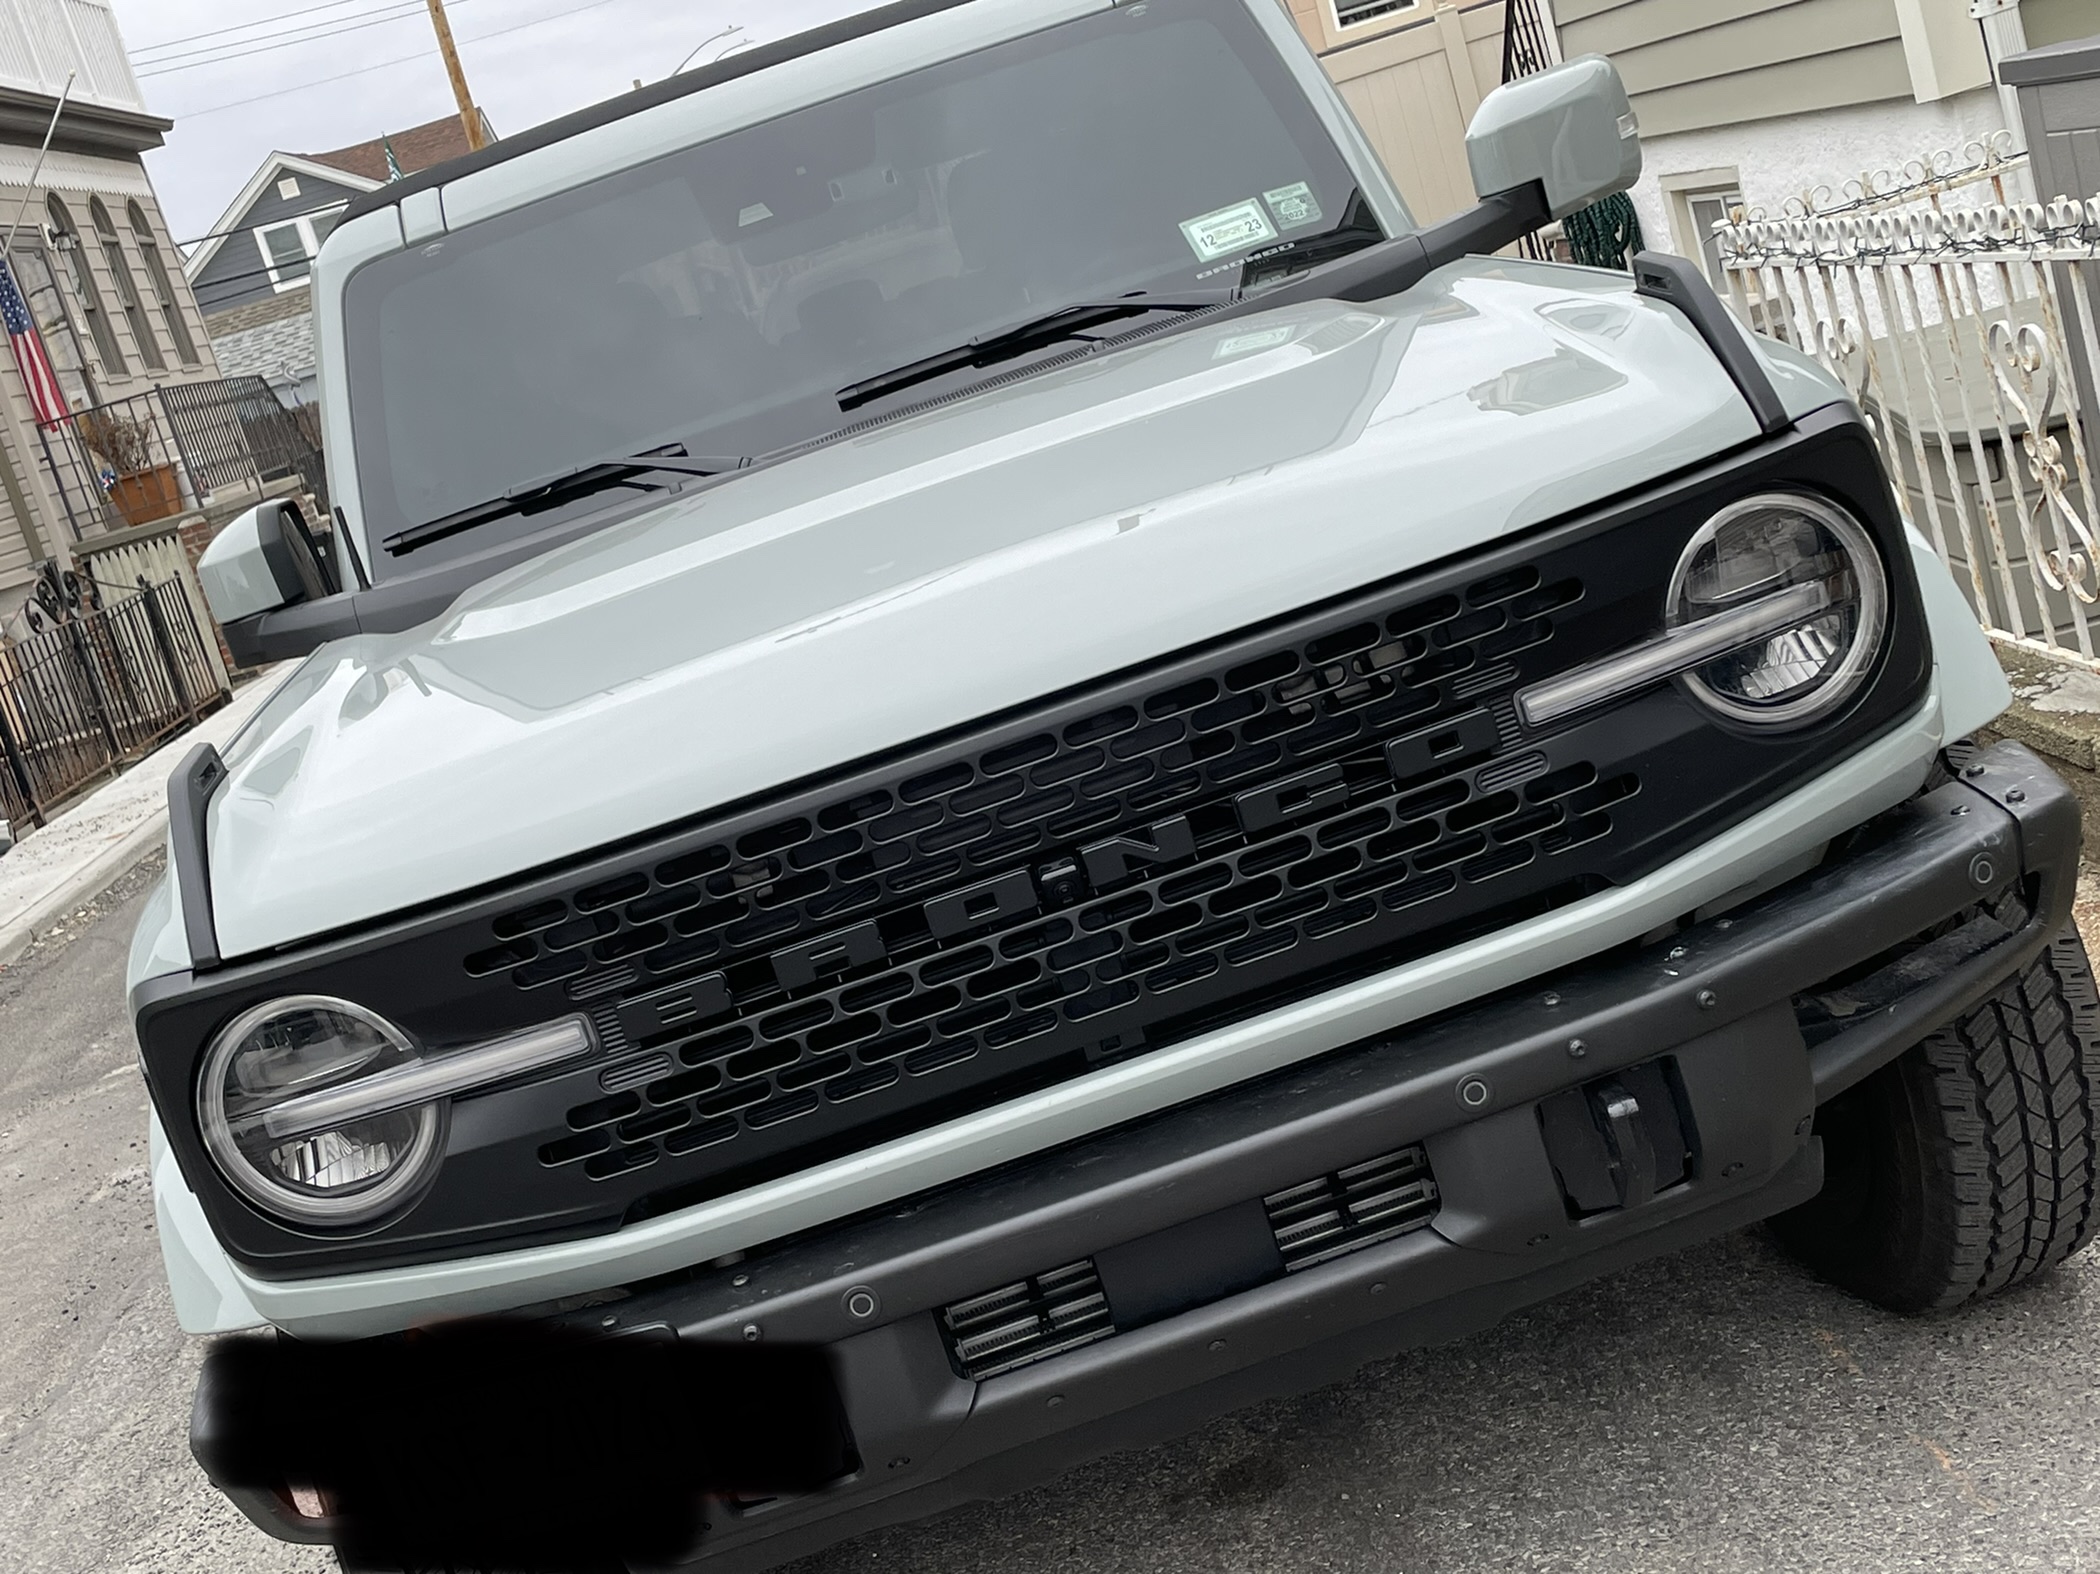 Ford Bronco FYI: Post-purchase OEM Grille Purchases E7C41E57-6519-4B87-A701-A6B41C9779A8